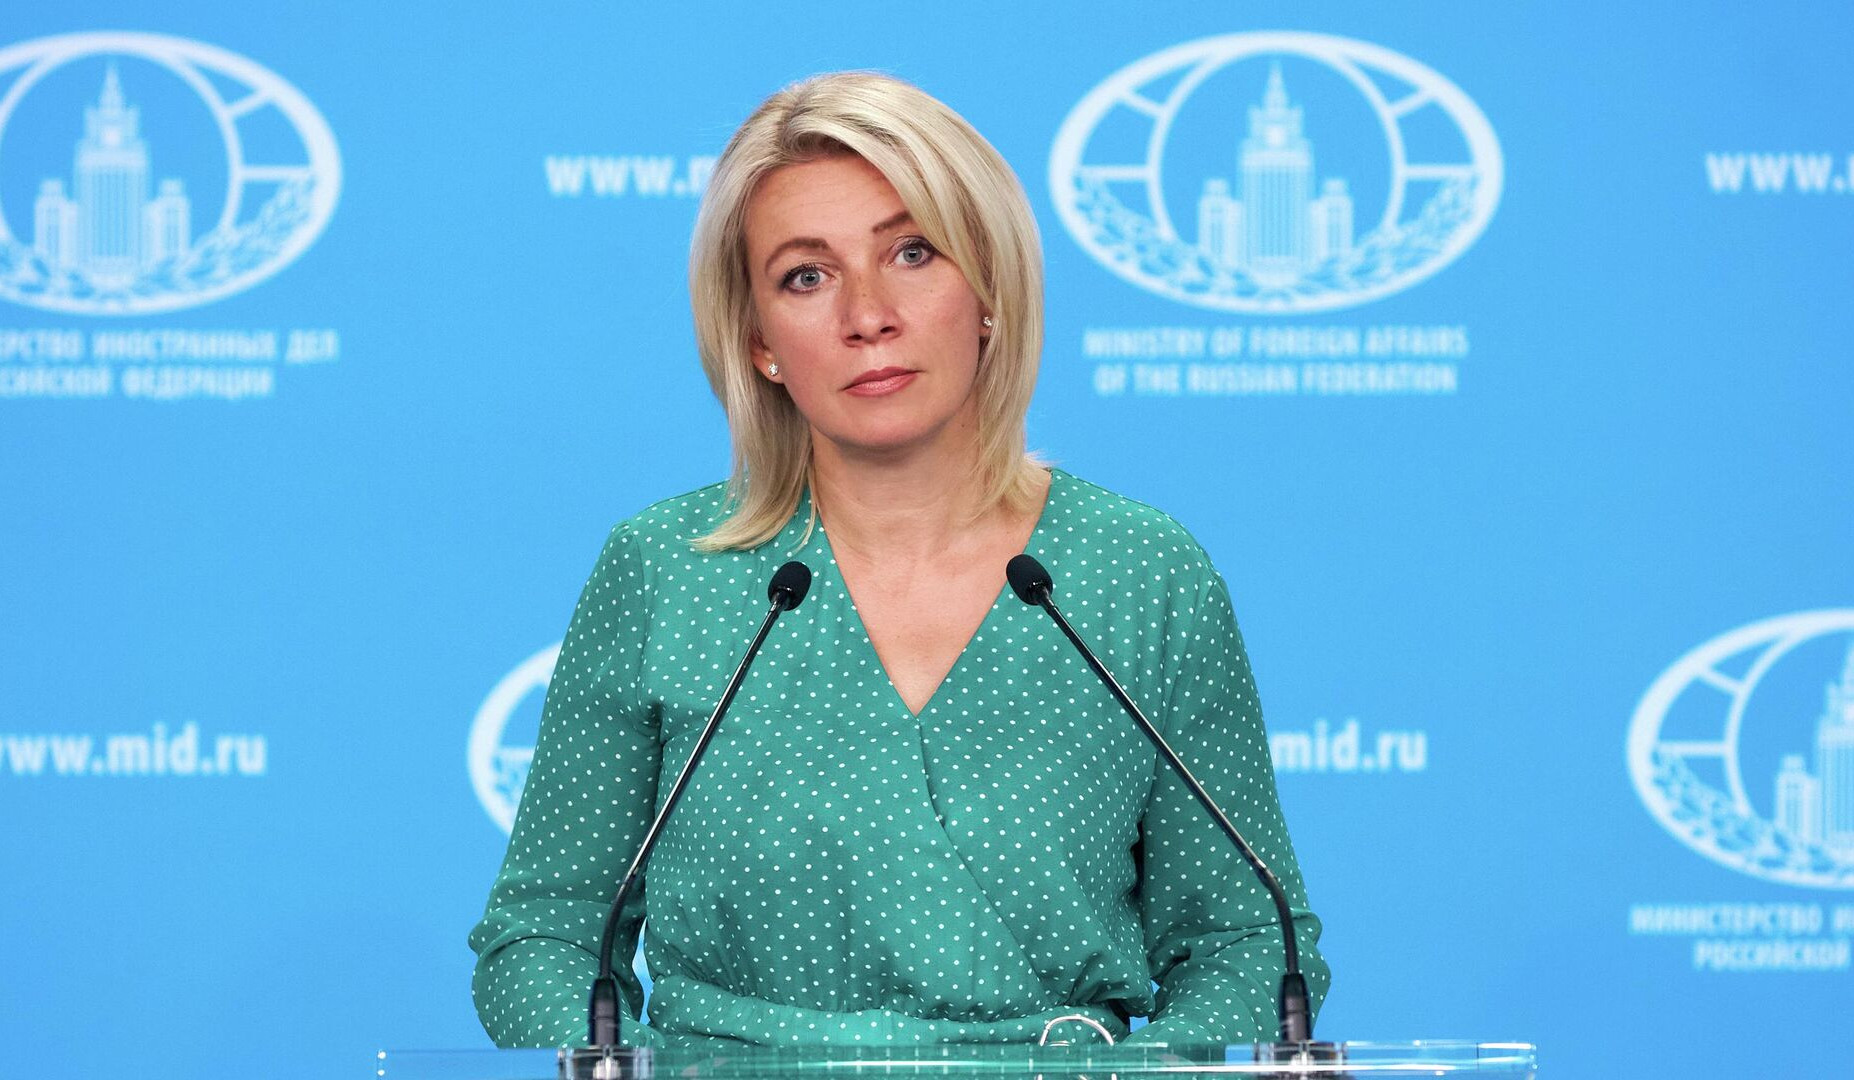 We consider statement of Foreign Minister Mirzoyan to be Armenia’s official position on CSTO: Zakharova